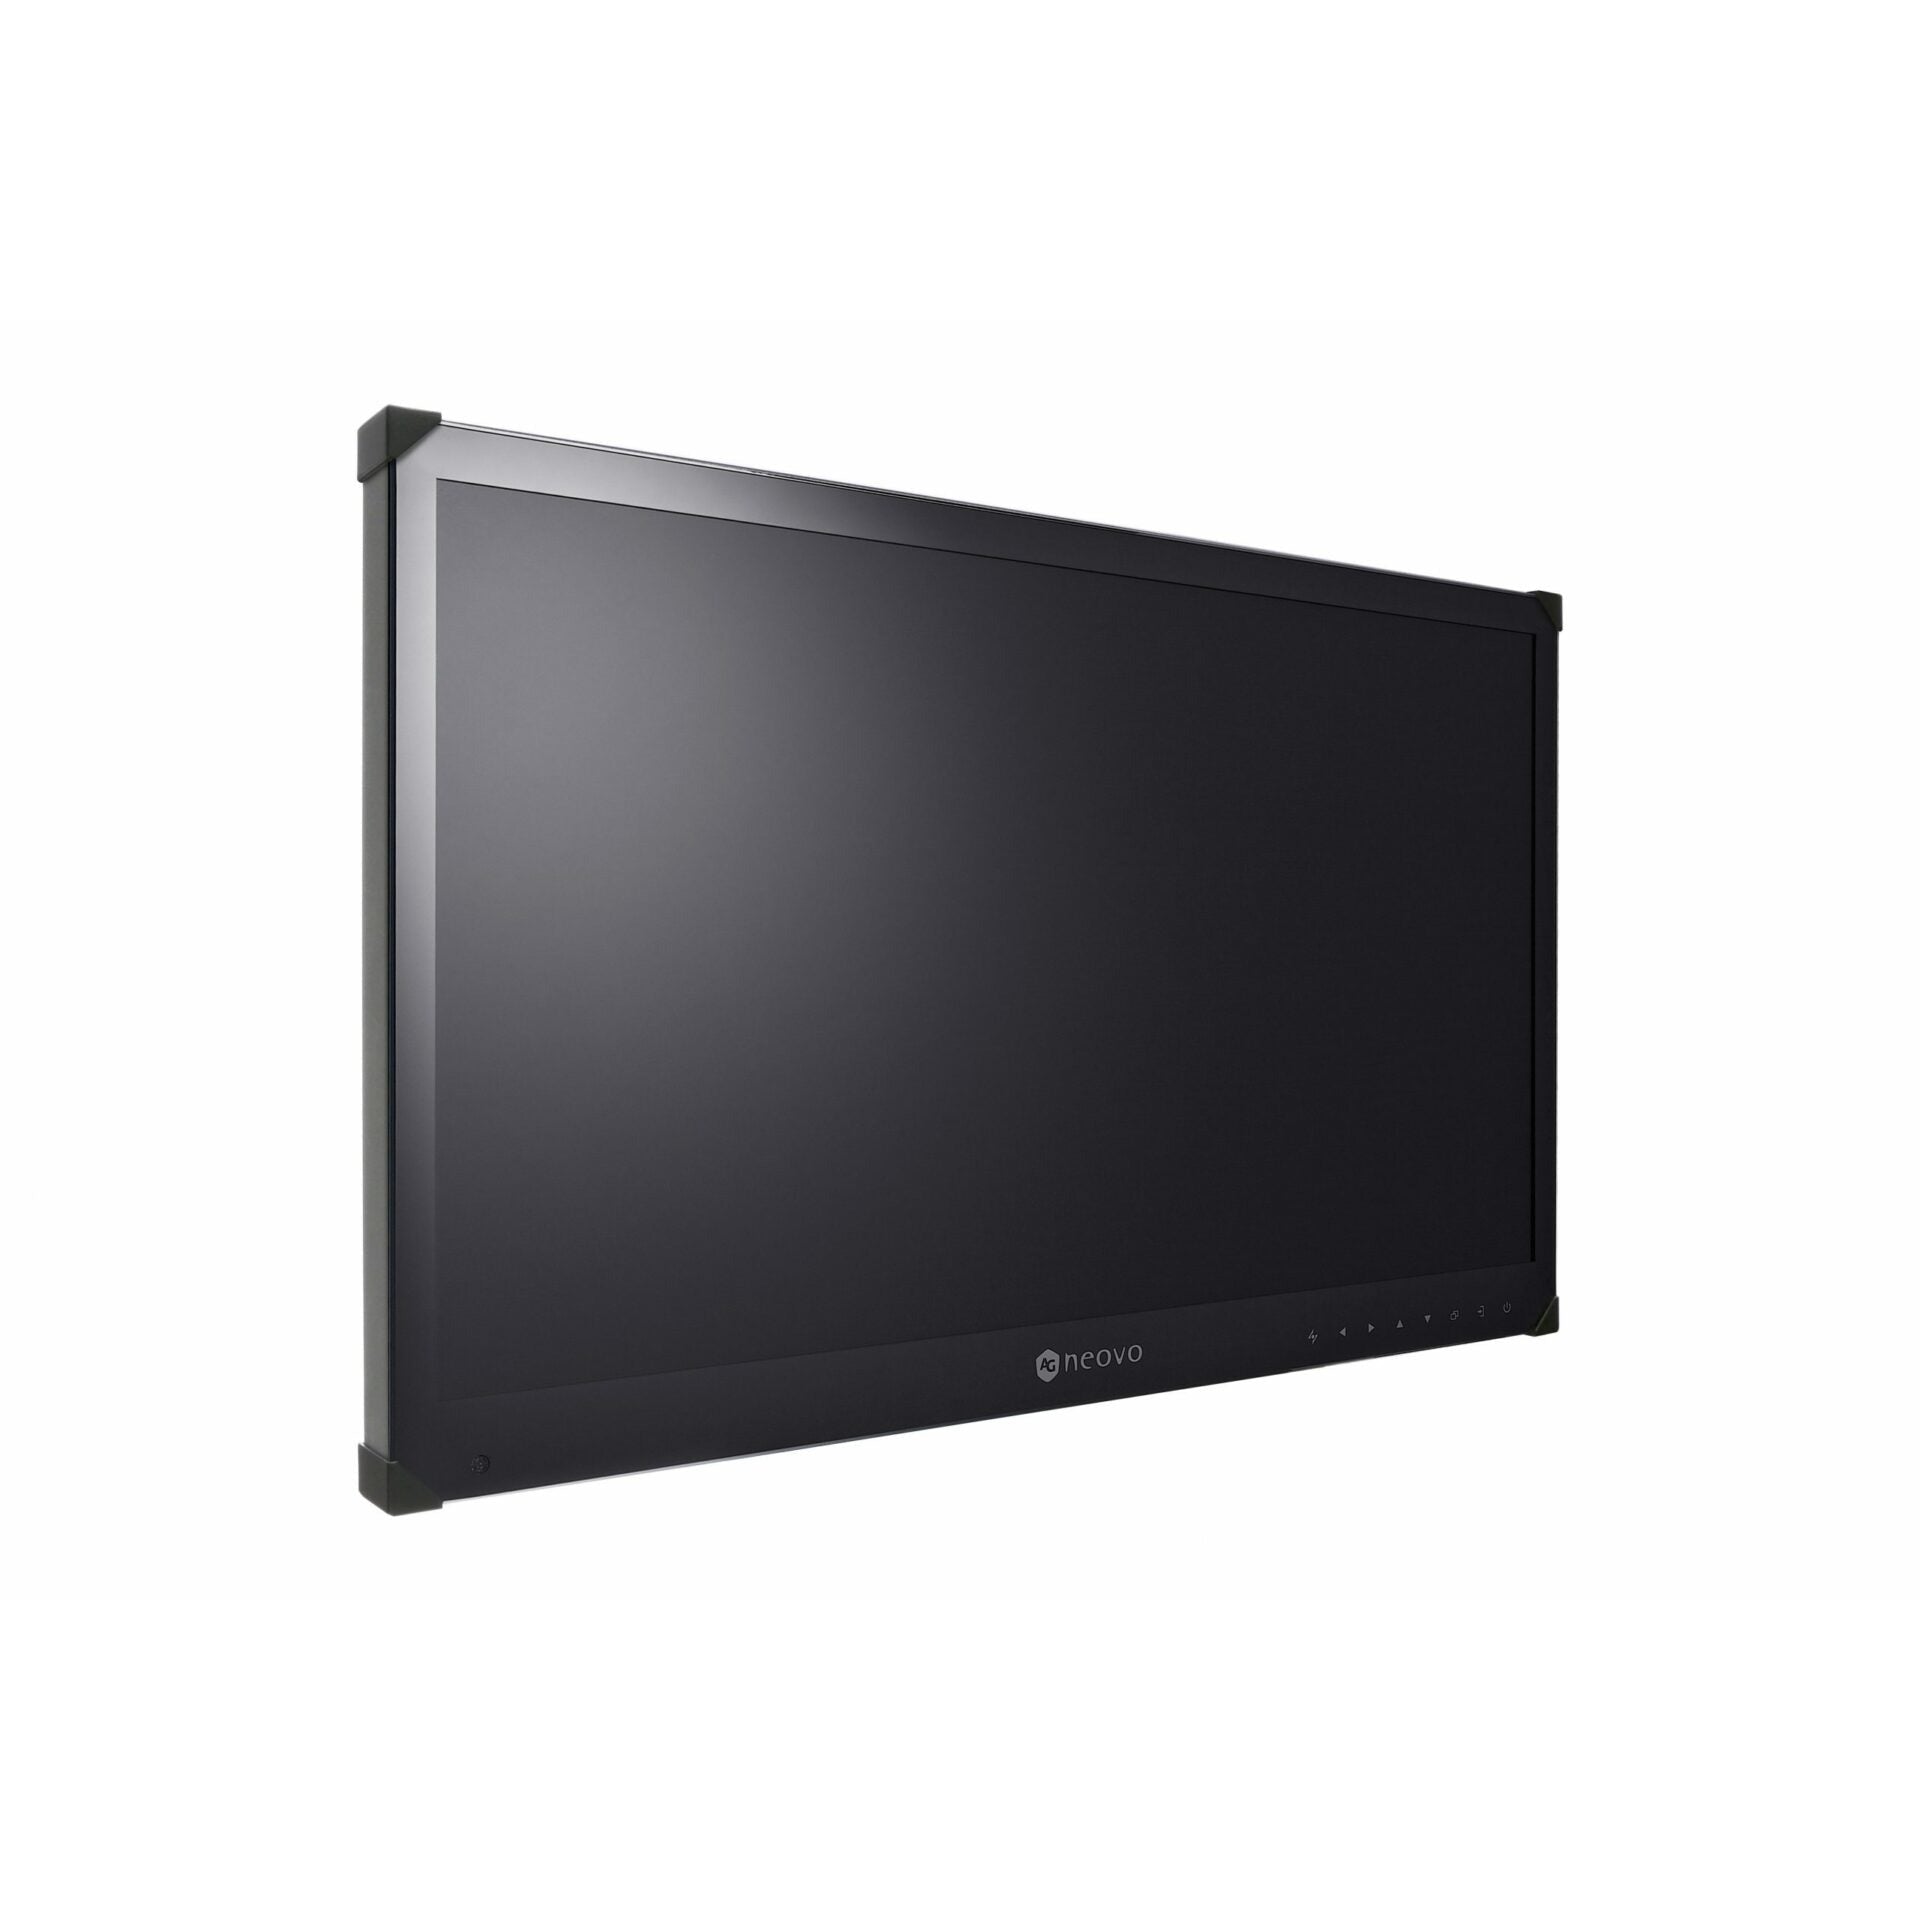 AG Neovo TBX-2201  22-Inch Display For Onboard Passenger Information System